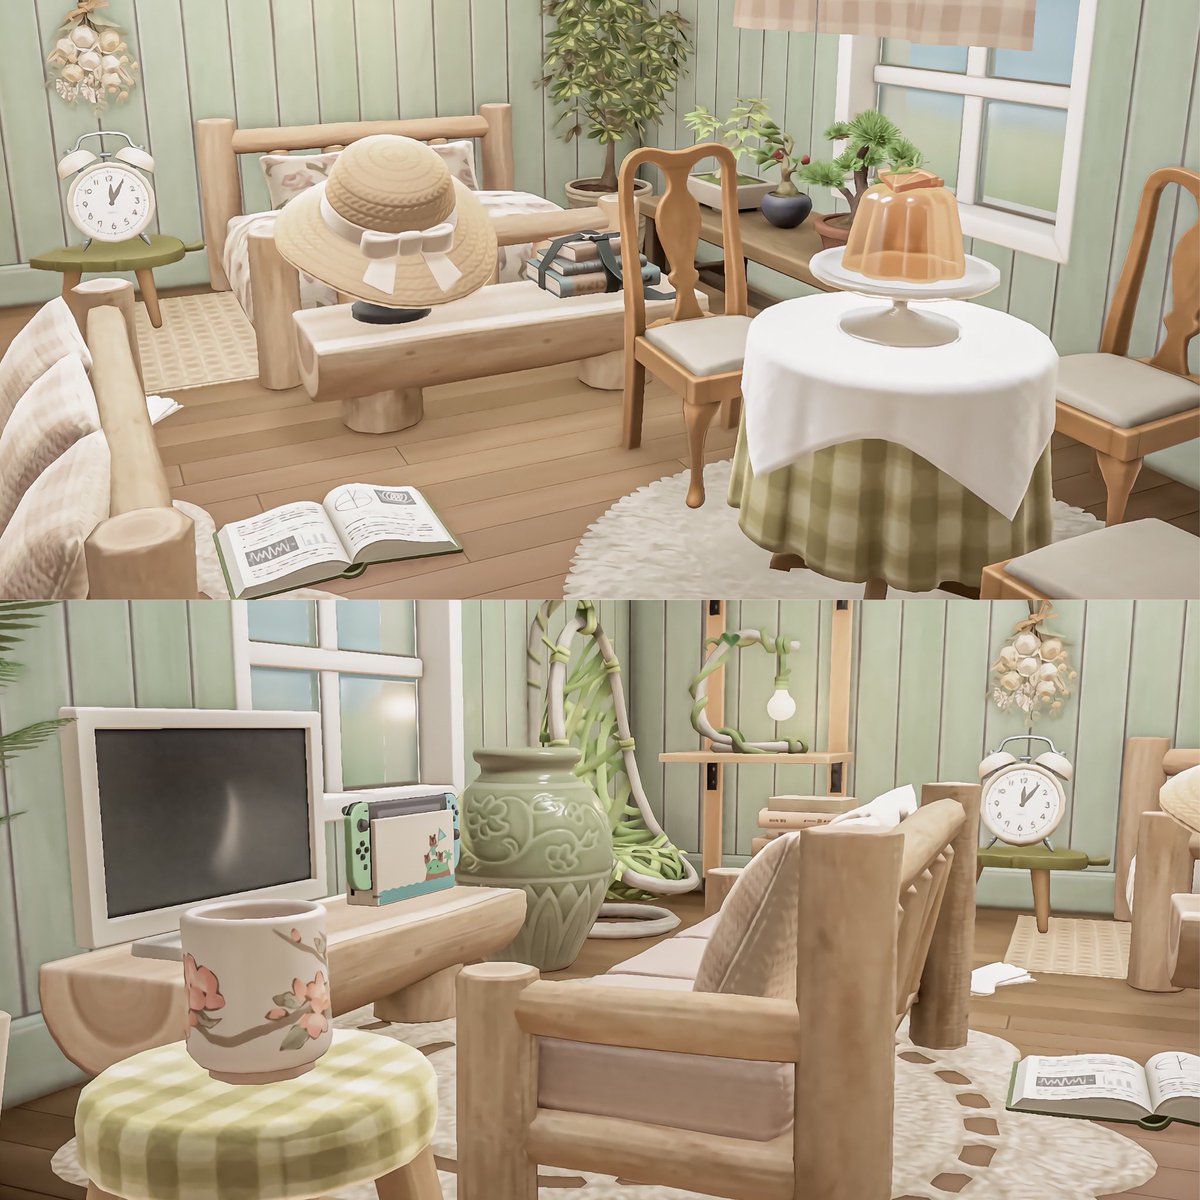 a minty-fresh new (vanilla) interior for my sweetest Melba 🐨

preset is ‘Cottage Escape’ by @acnh_kayleen 🌿

🏷 #ACNH #AnimalCrossing #AnimalCrossingNewHorizons #ACNHDesign #acnhinspo #vanillaACNH